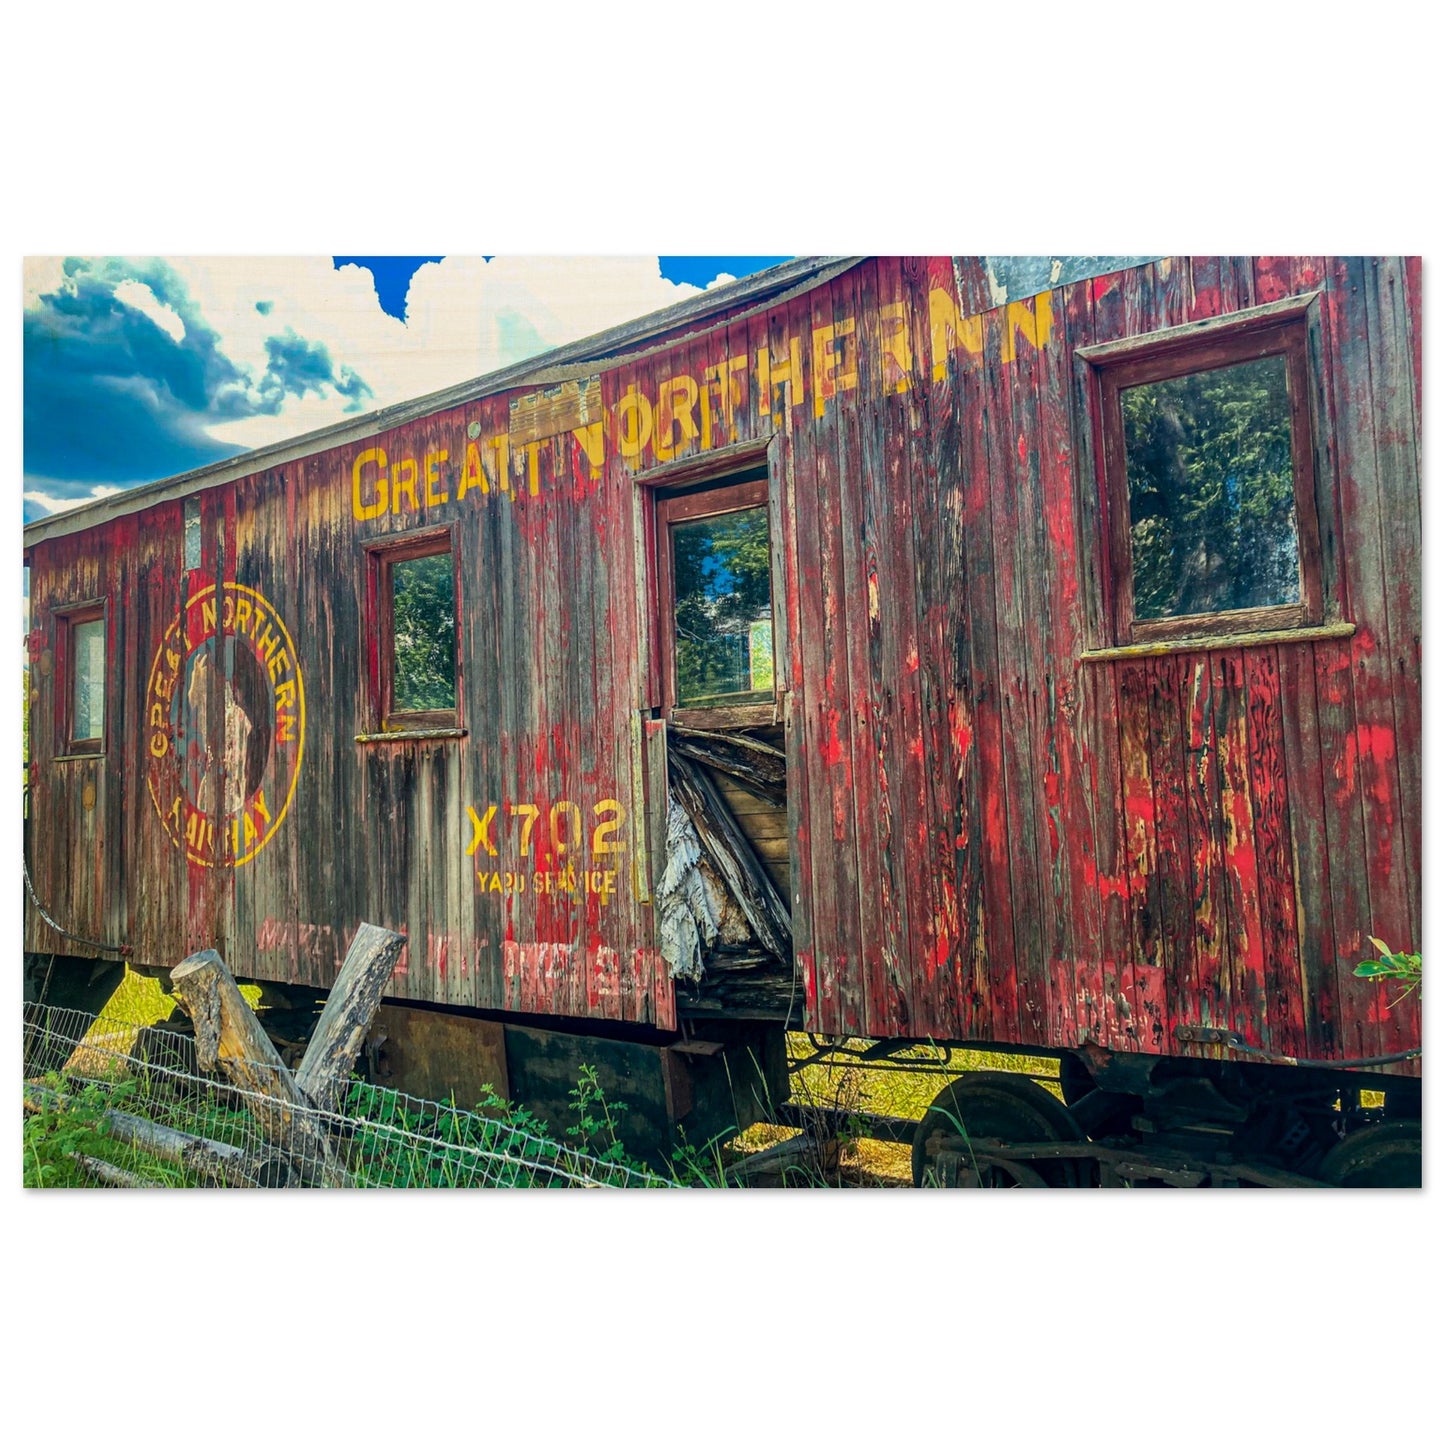 Abandoned Great Northern Pacific Railroad Car; Ghost Town, Montana Wood Print Communitea Books, Online Bookstore, Blog, & Gallery James Bonner